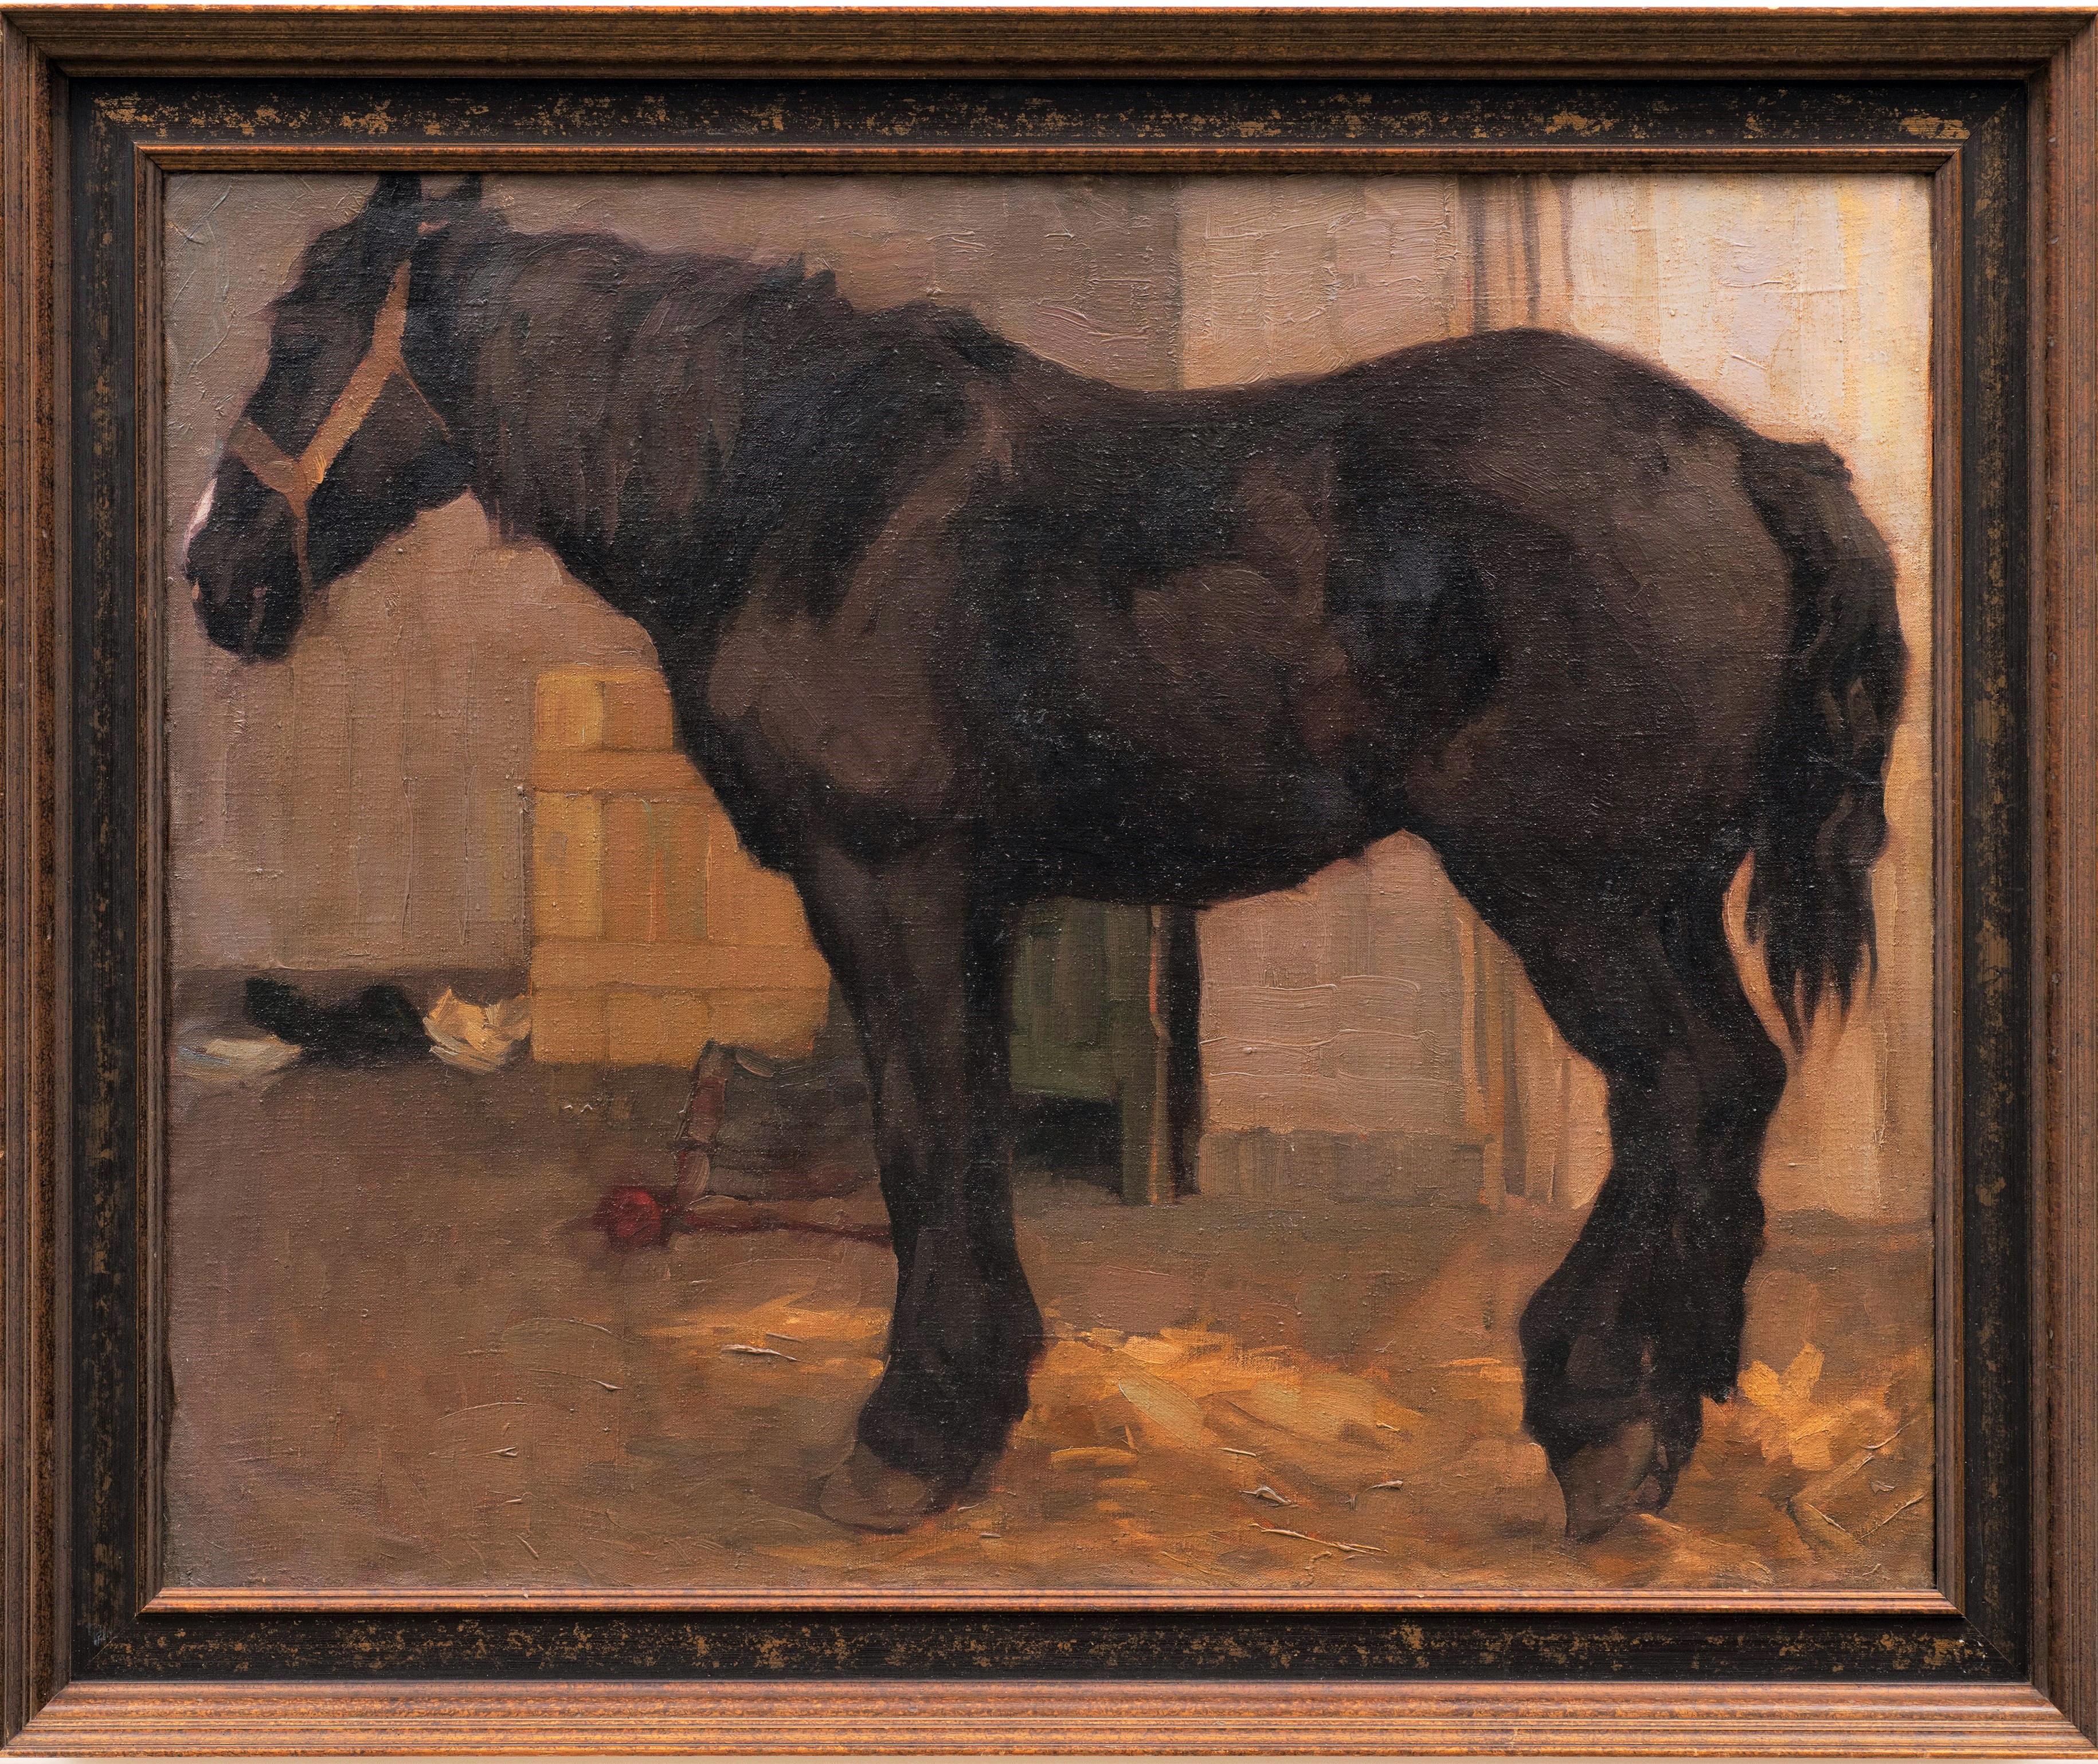 Horse Painting "Standing Horse in the Stable" Georg Wolf circa 1910